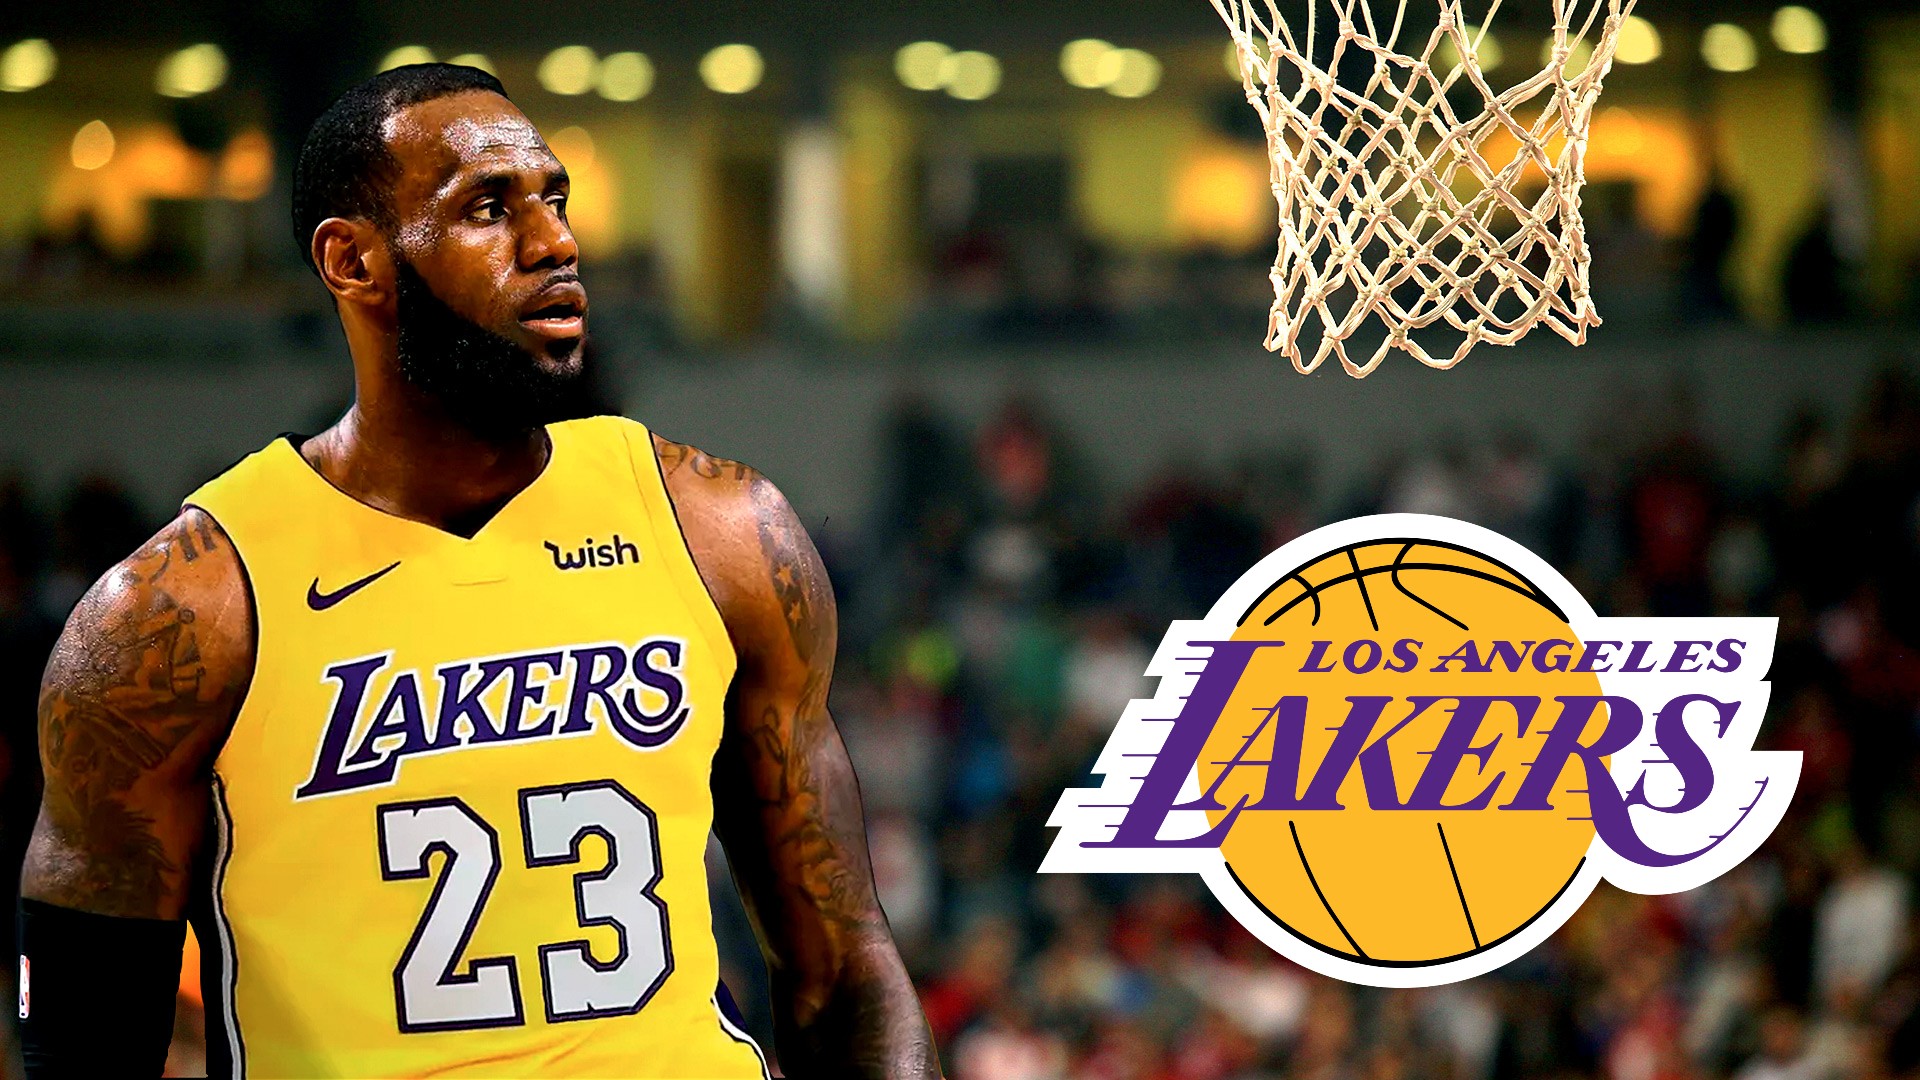 LeBron James Lakers Wallpaper with image dimensions 1920x1080 pixel. You can make this wallpaper for your Desktop Computer Backgrounds, Windows or Mac Screensavers, iPhone Lock screen, Tablet or Android and another Mobile Phone device